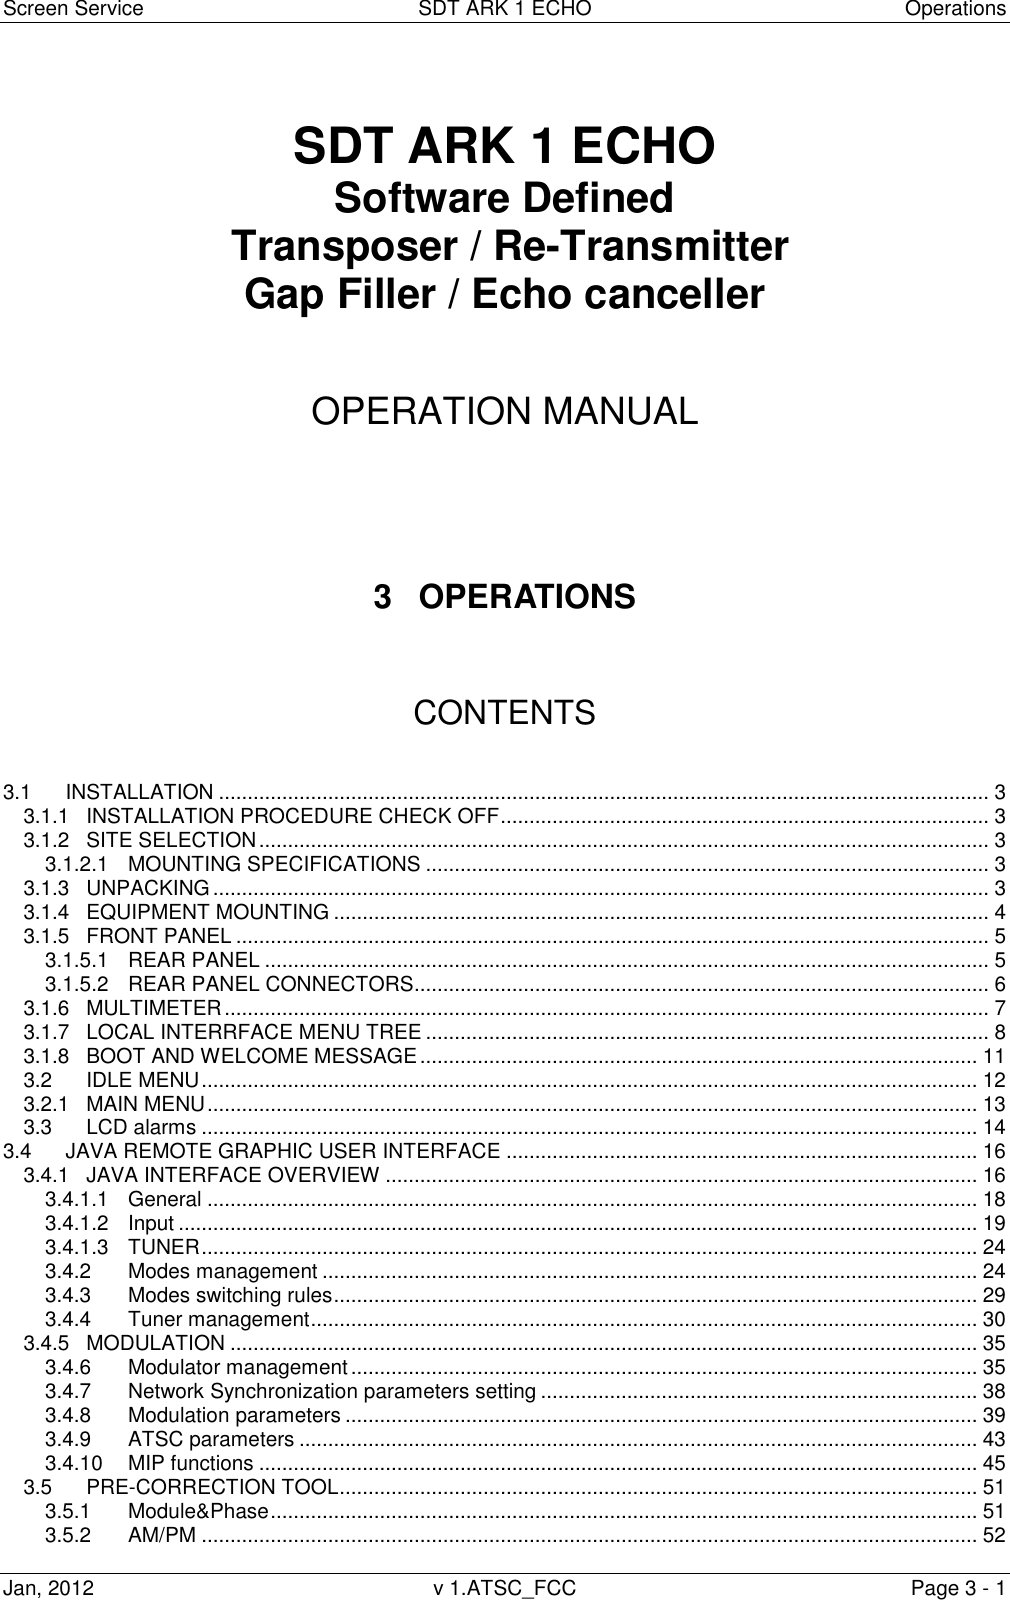 Screen Service  SDT ARK 1 ECHO  Operations Jan, 2012  v 1.ATSC_FCC  Page 3 - 1   SDT ARK 1 ECHO Software Defined  Transposer / Re-Transmitter Gap Filler / Echo canceller    OPERATION MANUAL      3  OPERATIONS    CONTENTS   3.1 INSTALLATION ...................................................................................................................................... 3 3.1.1 INSTALLATION PROCEDURE CHECK OFF ..................................................................................... 3 3.1.2 SITE SELECTION ............................................................................................................................... 3 3.1.2.1 MOUNTING SPECIFICATIONS .................................................................................................. 3 3.1.3 UNPACKING ....................................................................................................................................... 3 3.1.4 EQUIPMENT MOUNTING .................................................................................................................. 4 3.1.5 FRONT PANEL ................................................................................................................................... 5 3.1.5.1 REAR PANEL .............................................................................................................................. 5 3.1.5.2 REAR PANEL CONNECTORS.................................................................................................... 6 3.1.6 MULTIMETER ..................................................................................................................................... 7 3.1.7 LOCAL INTERRFACE MENU TREE .................................................................................................. 8 3.1.8 BOOT AND WELCOME MESSAGE ................................................................................................. 11 3.2 IDLE MENU ....................................................................................................................................... 12 3.2.1 MAIN MENU ...................................................................................................................................... 13 3.3 LCD alarms ....................................................................................................................................... 14 3.4 JAVA REMOTE GRAPHIC USER INTERFACE .................................................................................. 16 3.4.1 JAVA INTERFACE OVERVIEW ....................................................................................................... 16 3.4.1.1 General ...................................................................................................................................... 18 3.4.1.2 Input ........................................................................................................................................... 19 3.4.1.3 TUNER ....................................................................................................................................... 24 3.4.2 Modes management .................................................................................................................. 24 3.4.3 Modes switching rules ................................................................................................................ 29 3.4.4 Tuner management .................................................................................................................... 30 3.4.5 MODULATION .................................................................................................................................. 35 3.4.6 Modulator management ............................................................................................................. 35 3.4.7 Network Synchronization parameters setting ............................................................................ 38 3.4.8 Modulation parameters .............................................................................................................. 39 3.4.9 ATSC parameters ...................................................................................................................... 43 3.4.10 MIP functions ............................................................................................................................. 45 3.5 PRE-CORRECTION TOOL ............................................................................................................... 51 3.5.1 Module&amp;Phase ........................................................................................................................... 51 3.5.2 AM/PM ....................................................................................................................................... 52 